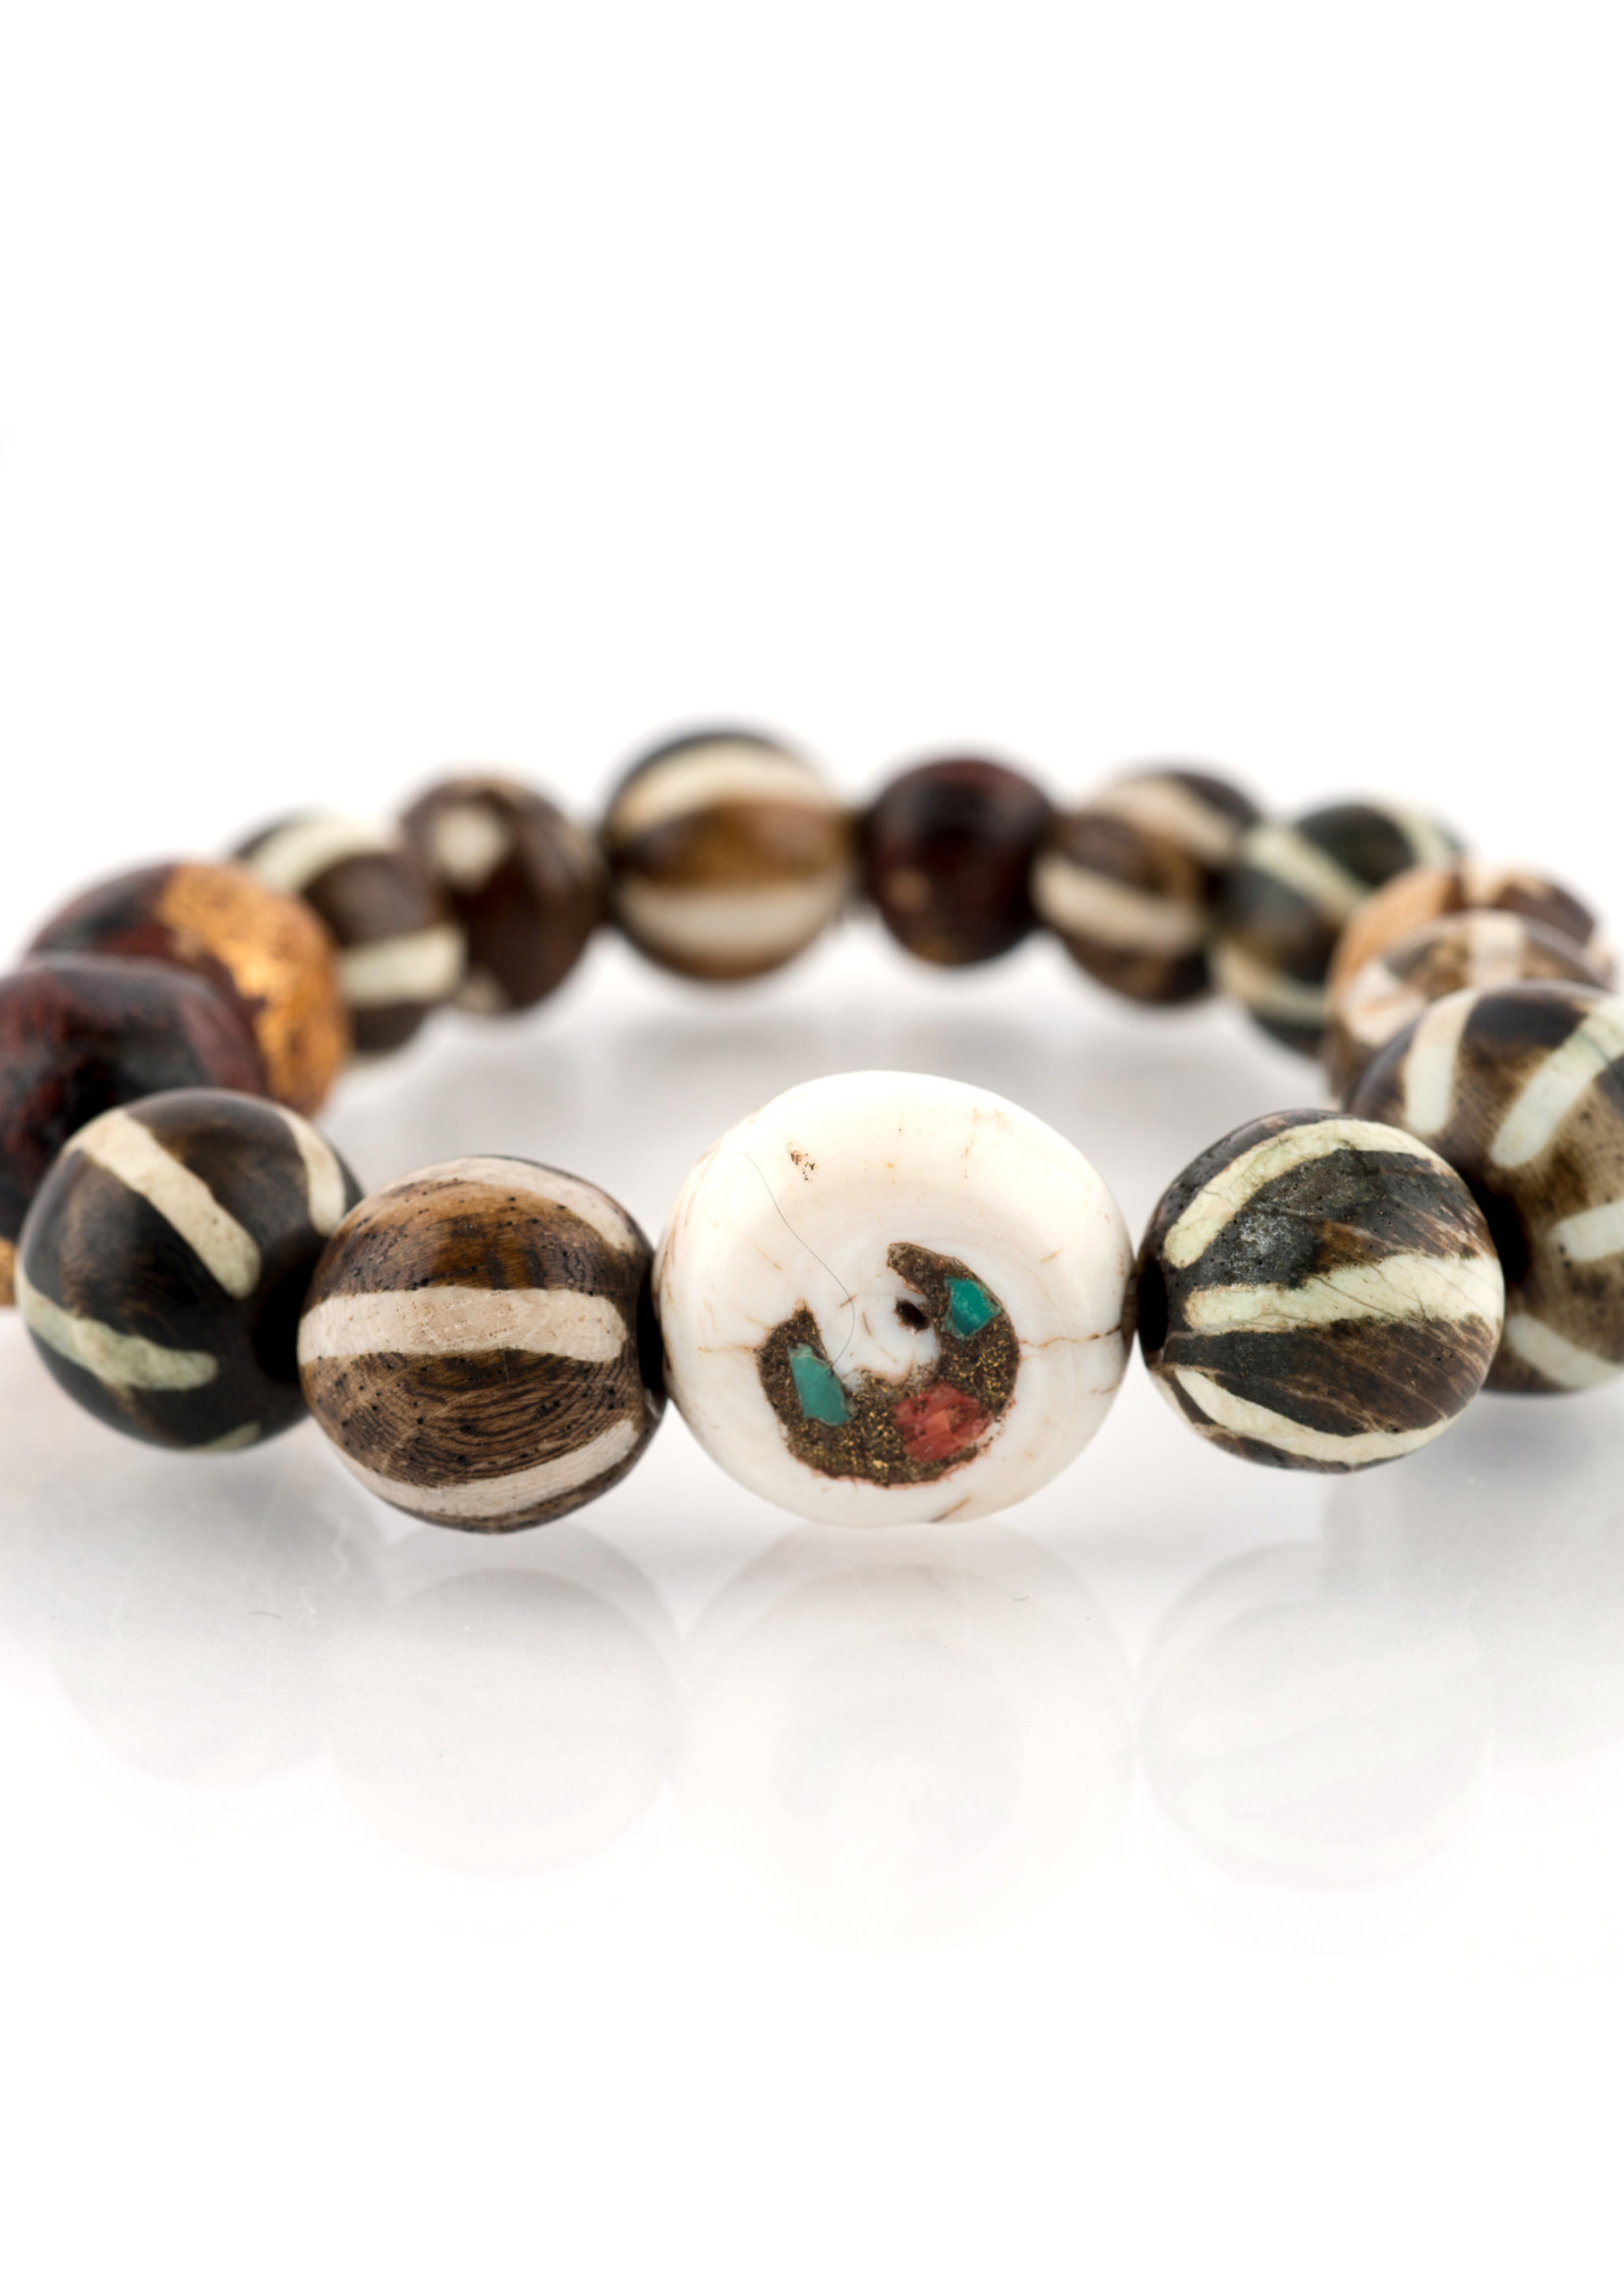 Mina Danielle Brown & White Striped Bone Beads with Buddha Beads, White Coral and Turquoise Inlaid Bead